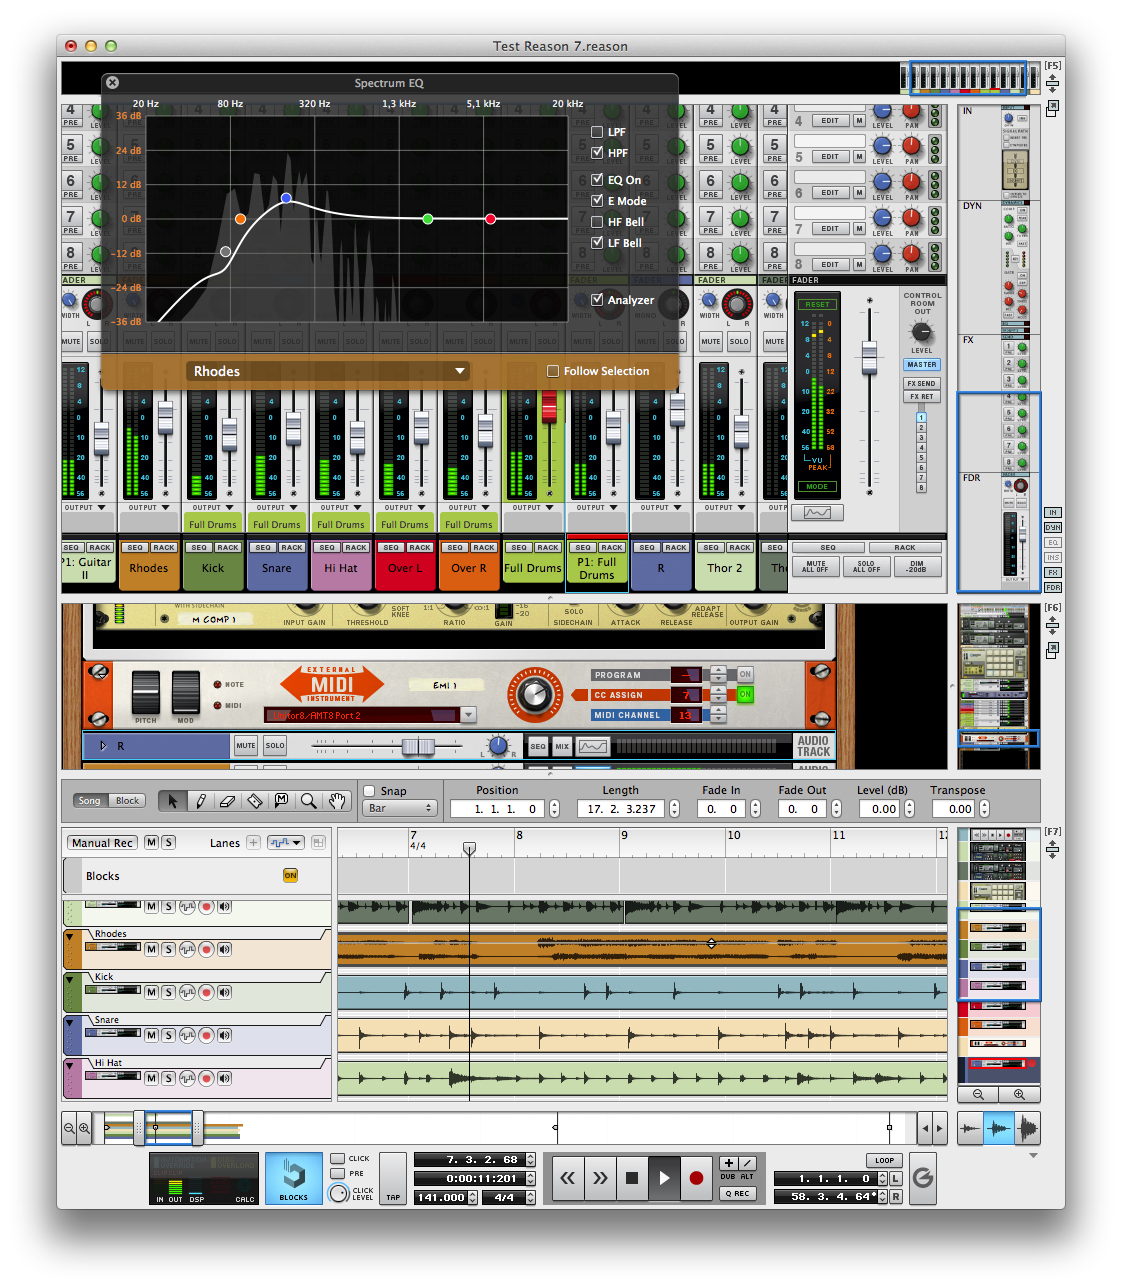 can propellerhead reason 7 be upgraded to reason 9